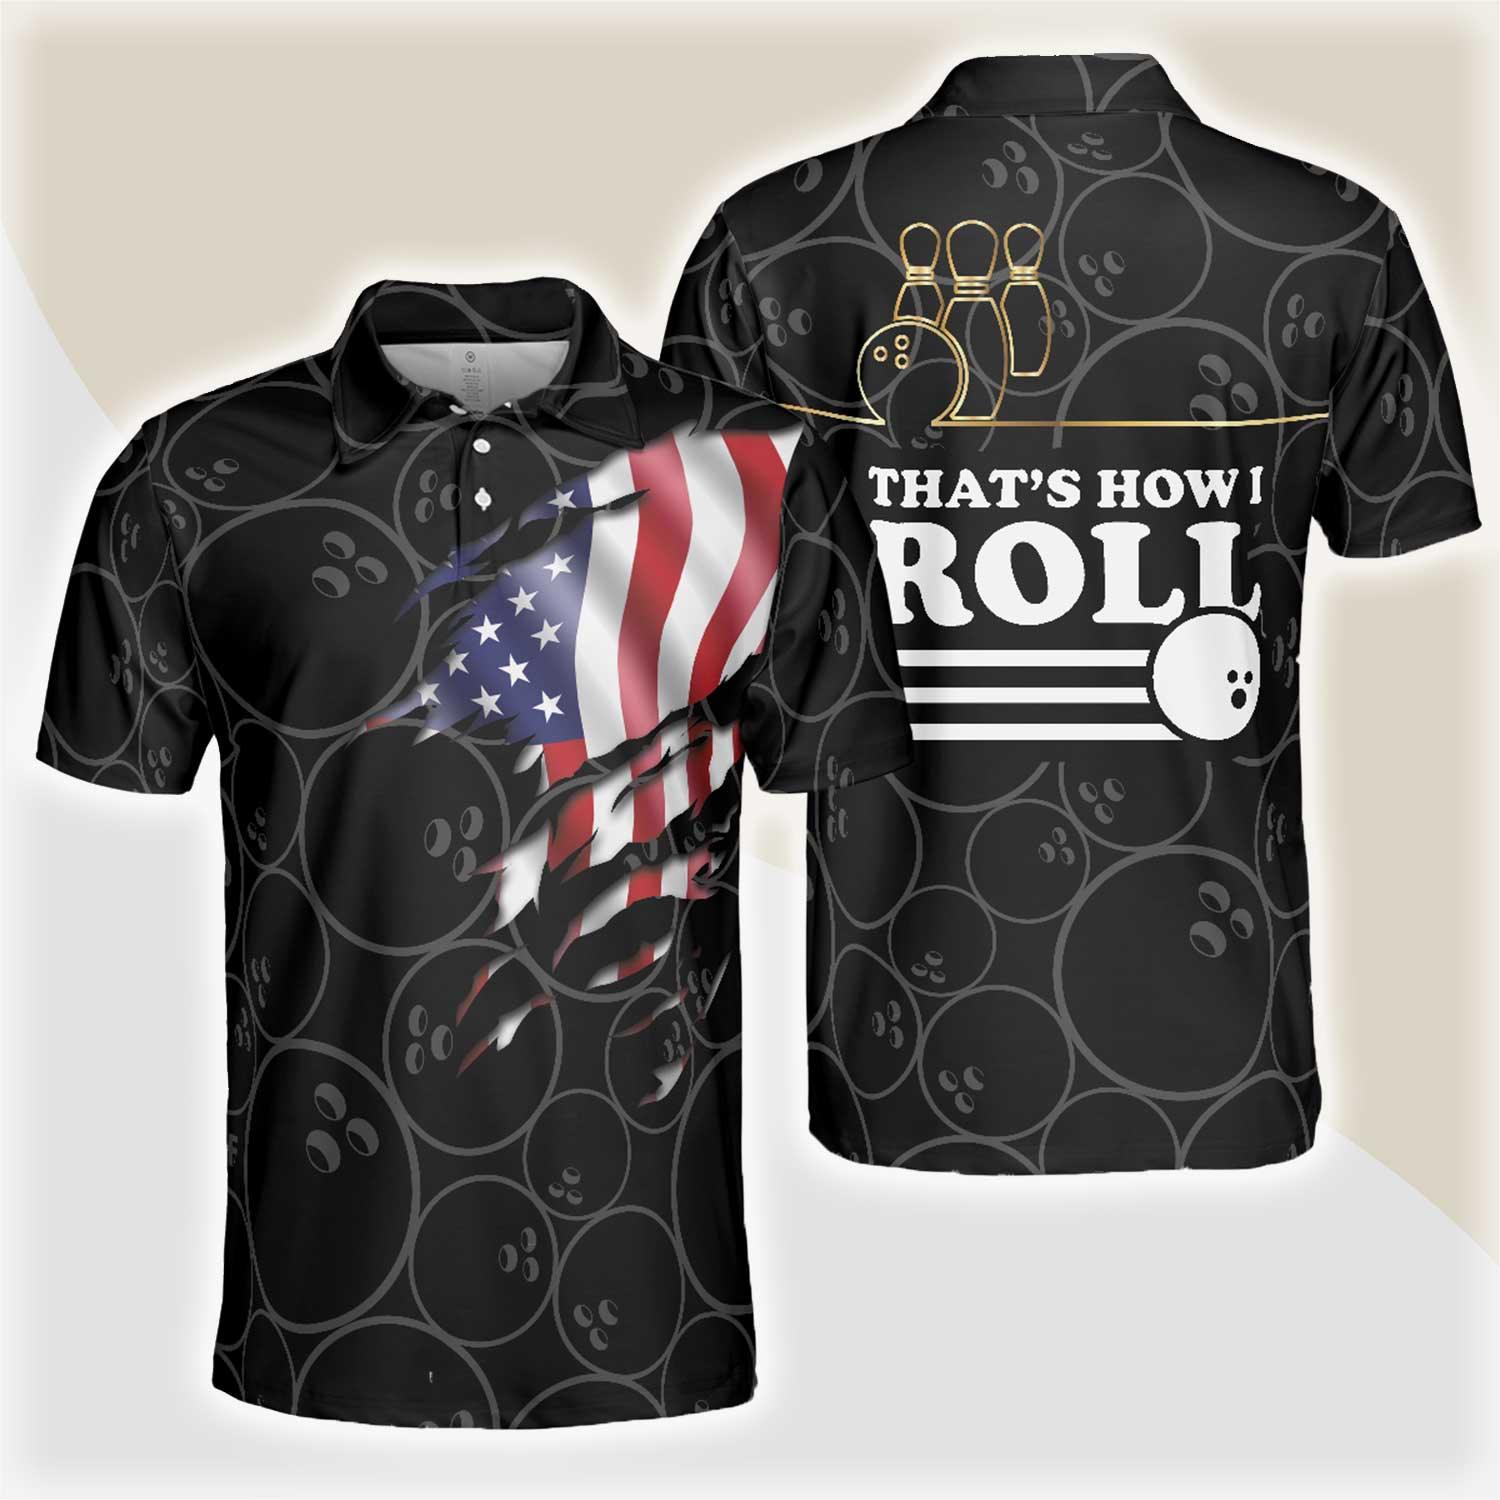 Bowling Polo Shirt, Best Bowling Shirt For Men, American Flag Bowling Shirt For Male Bowlers - Perfect Gift For Bowling Lovers, Bowlers - Amzanimalsgift